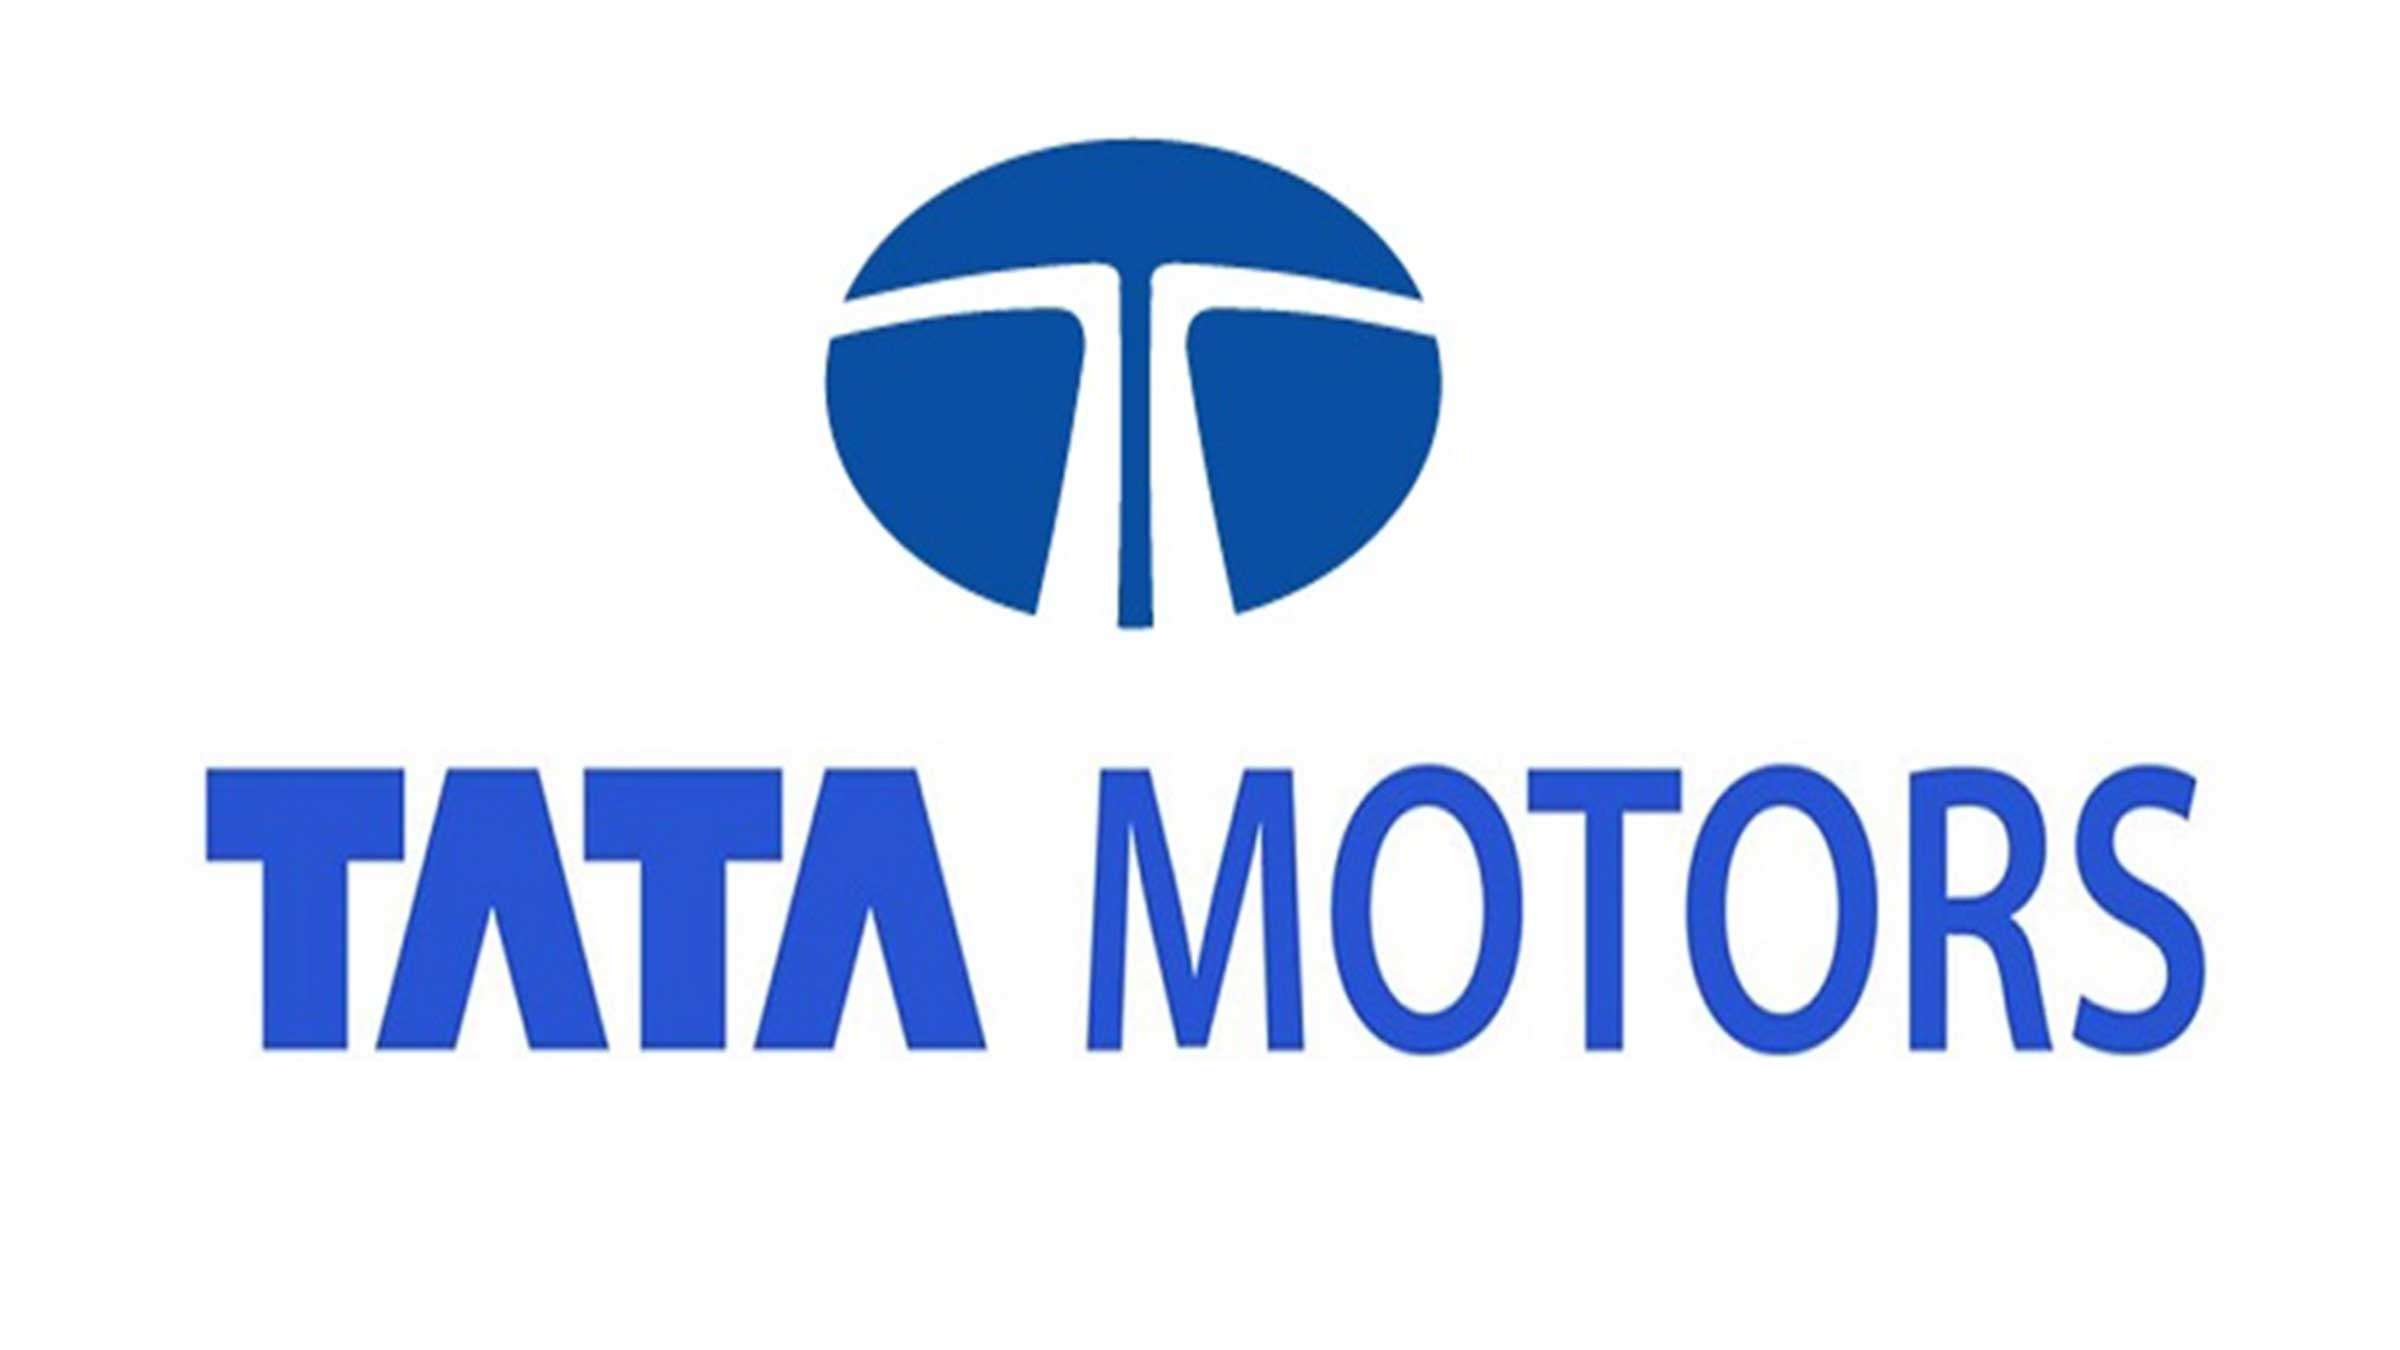 Tata Motors asks staff to work from home over coronavirus concerns